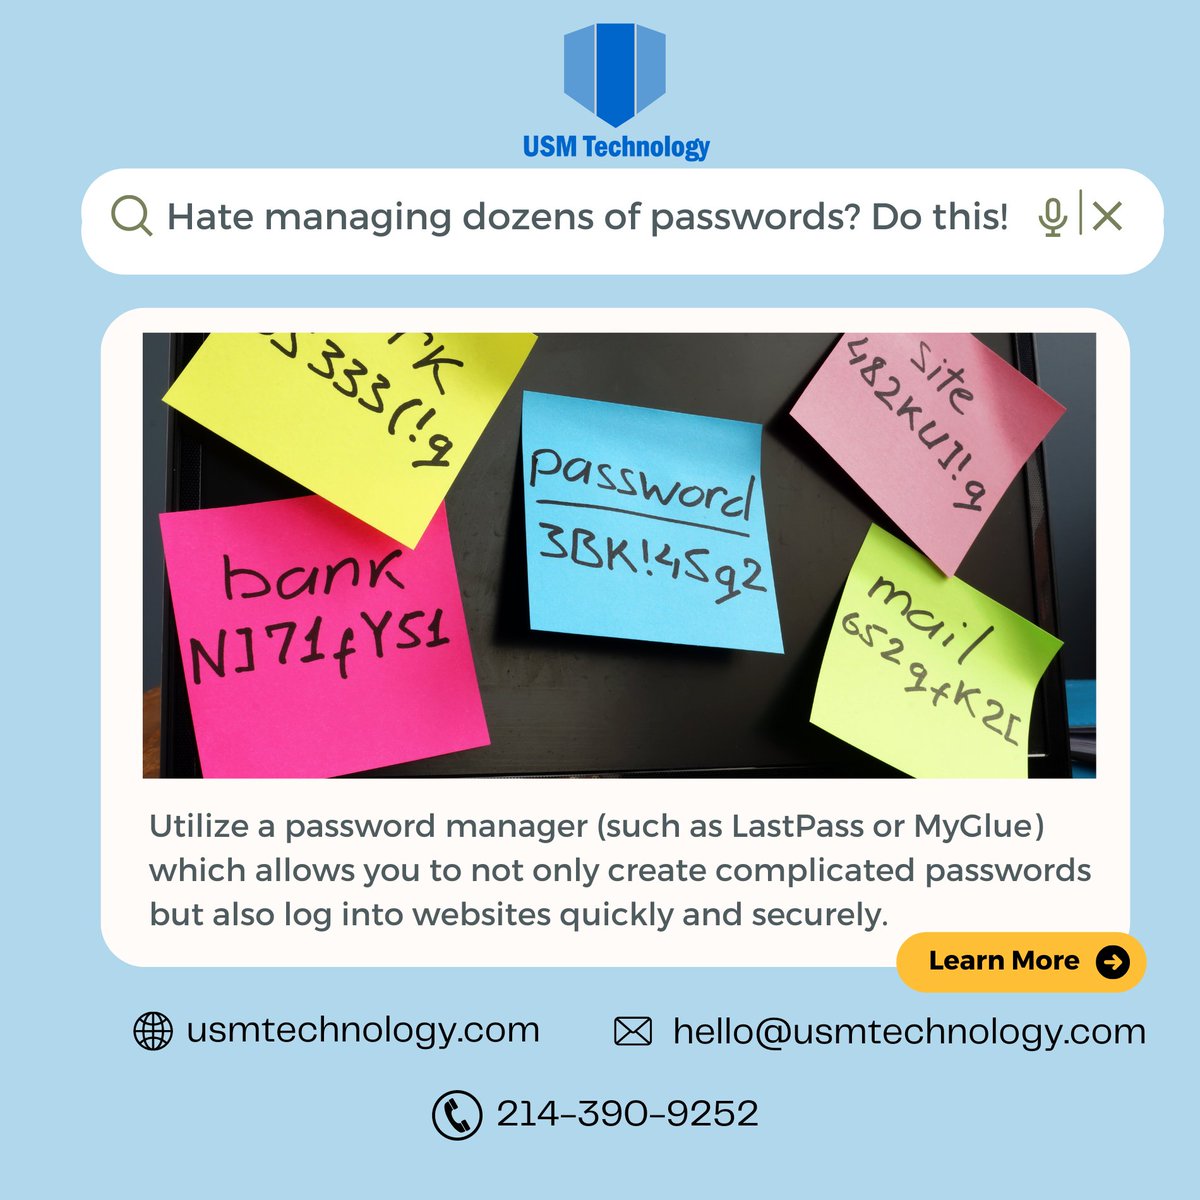 #TechTipTuesday

Using a professional password manager, like LastPass or MyGlue, allows you to not only create complicated passwords when your password expires but also helps you log into websites quickly and securely.

#cybersecurity #businesstip #password #technology